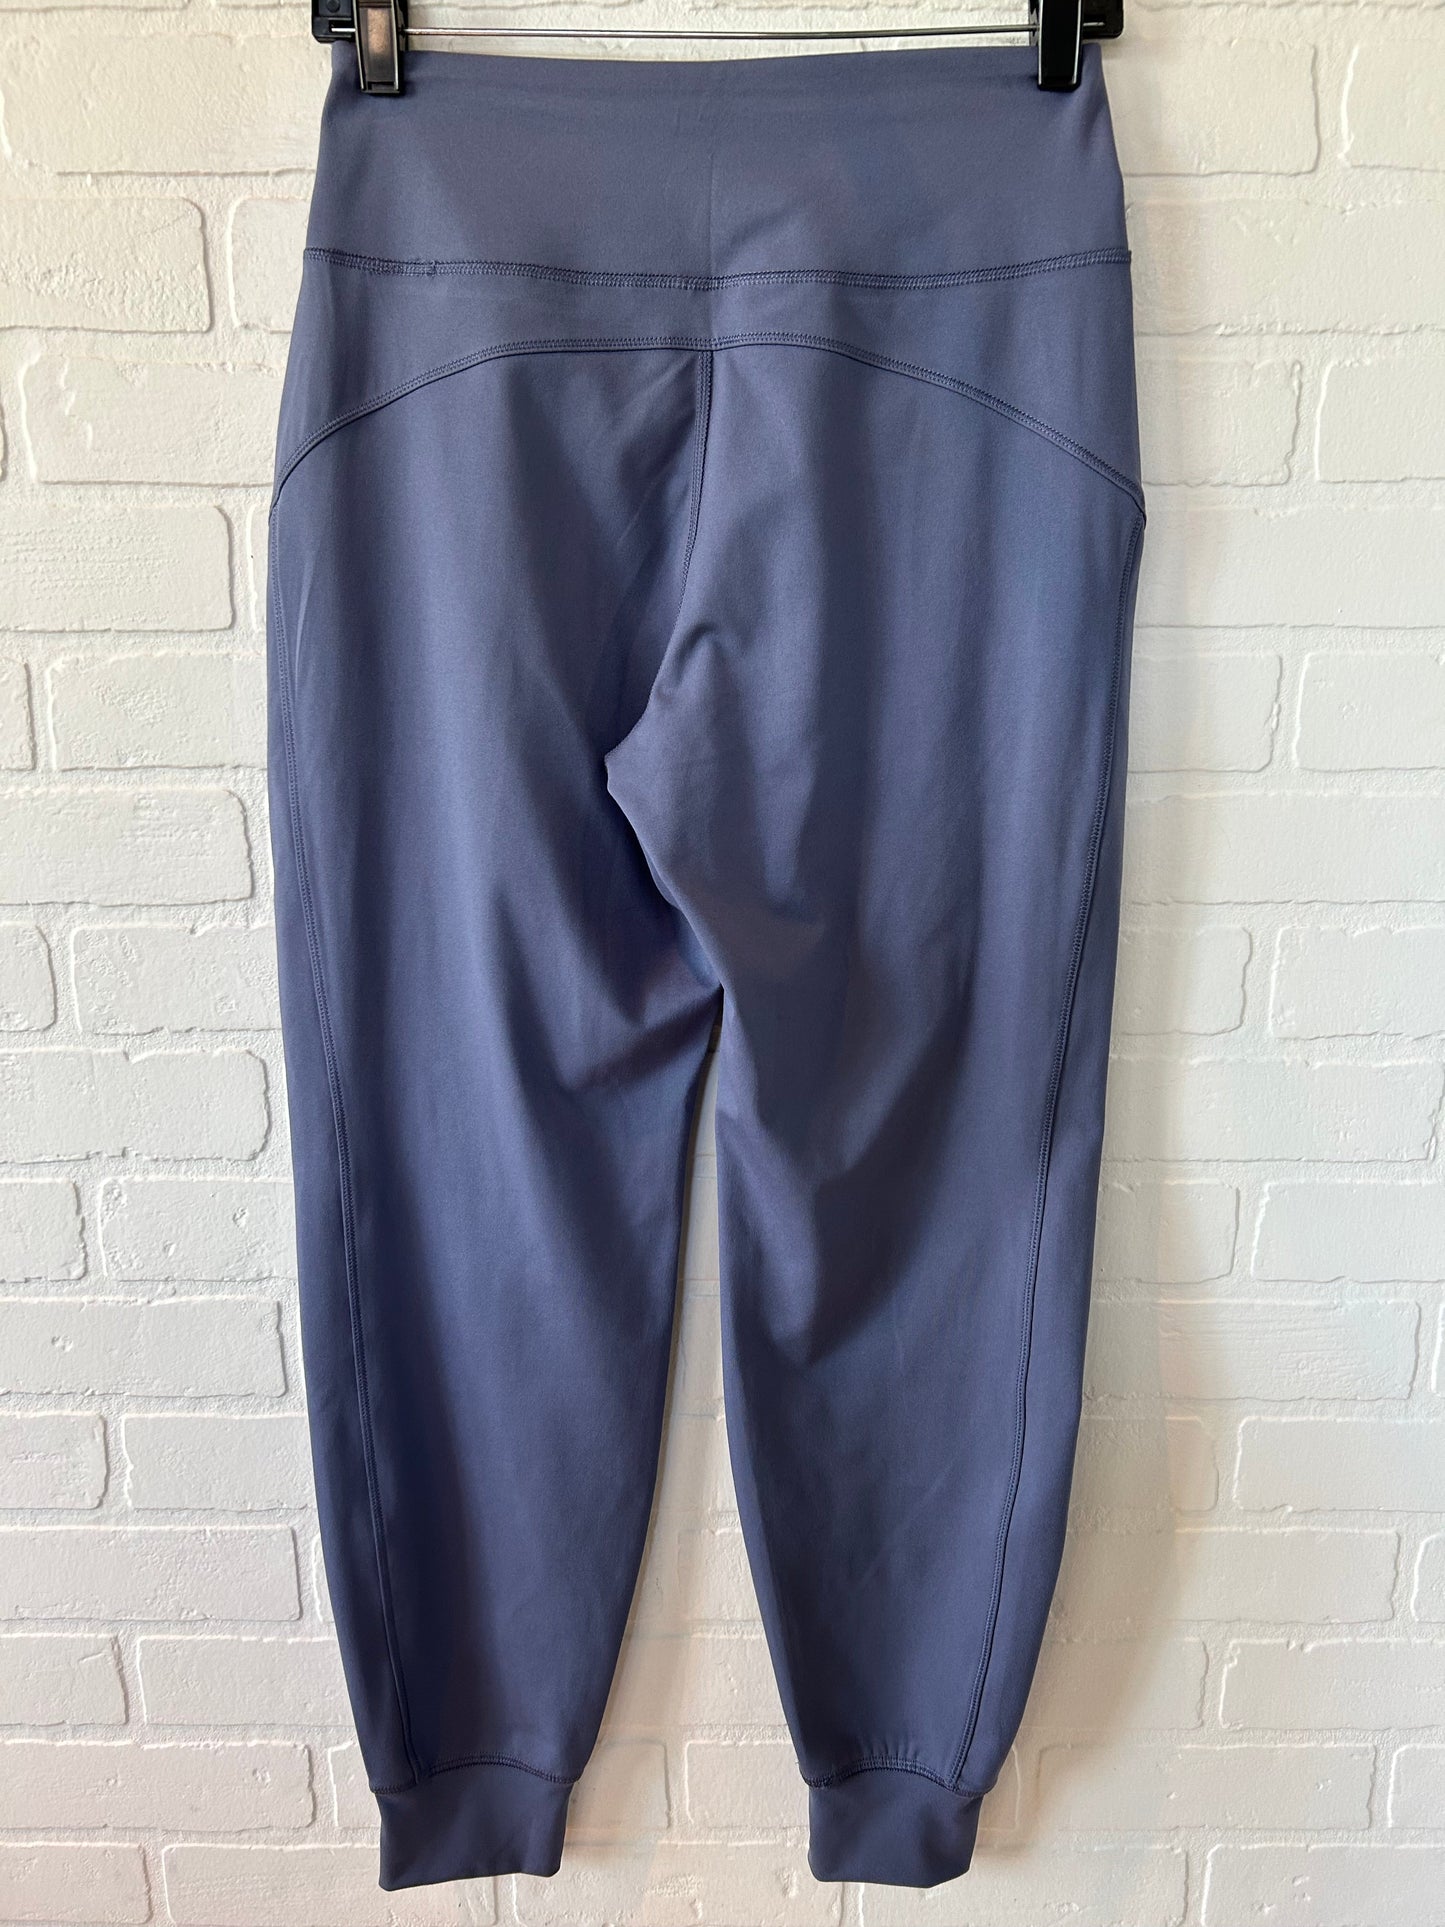 Blue Athletic Leggings 90 Degrees By Reflex, Size 4